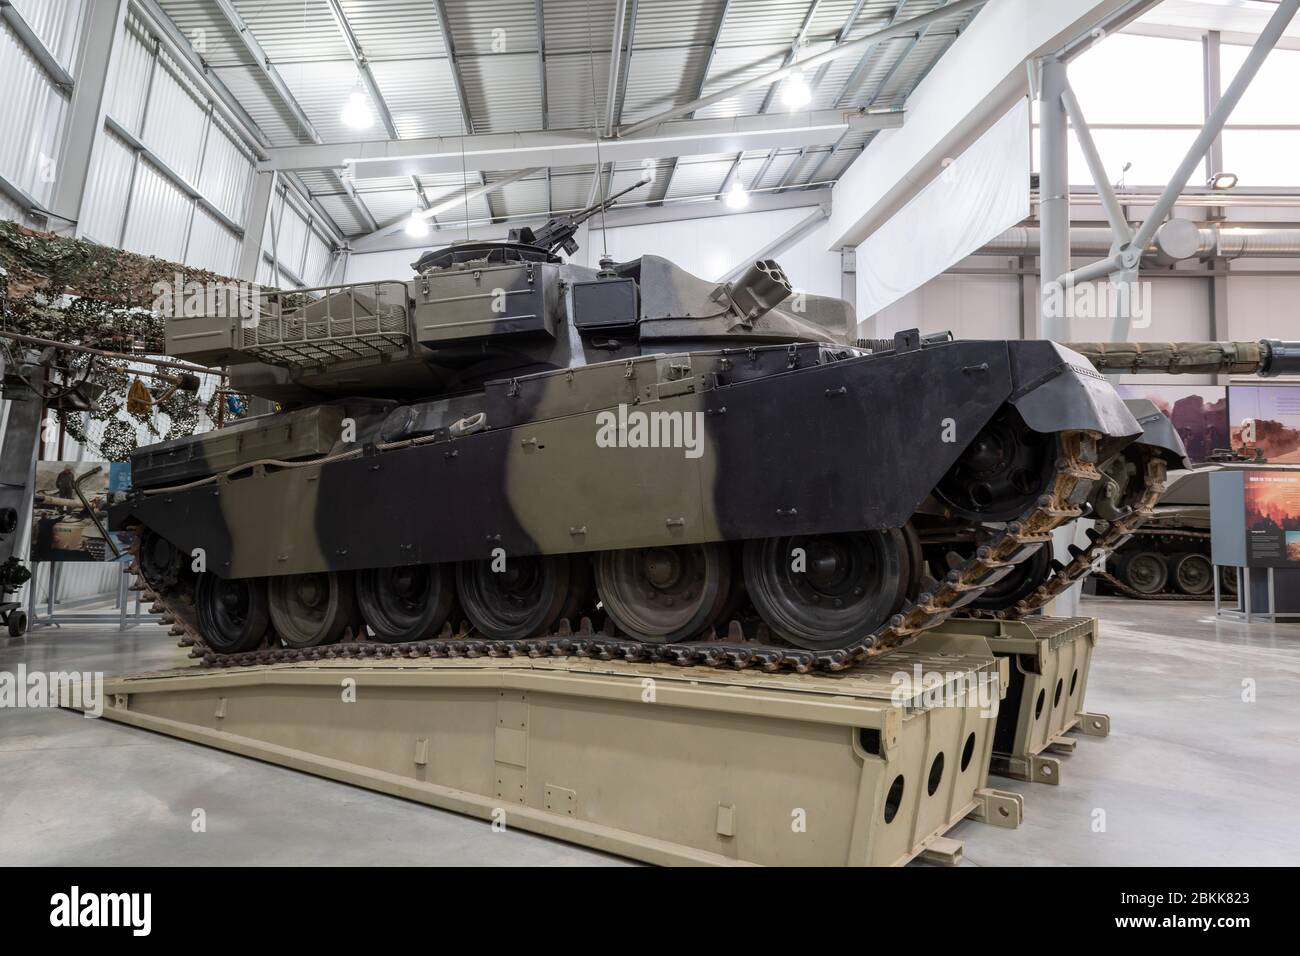 Bovington.Dorset.United Kingdom.February 9th 2020.A chieftain tank is on display at The Tank Museum Stock Photo